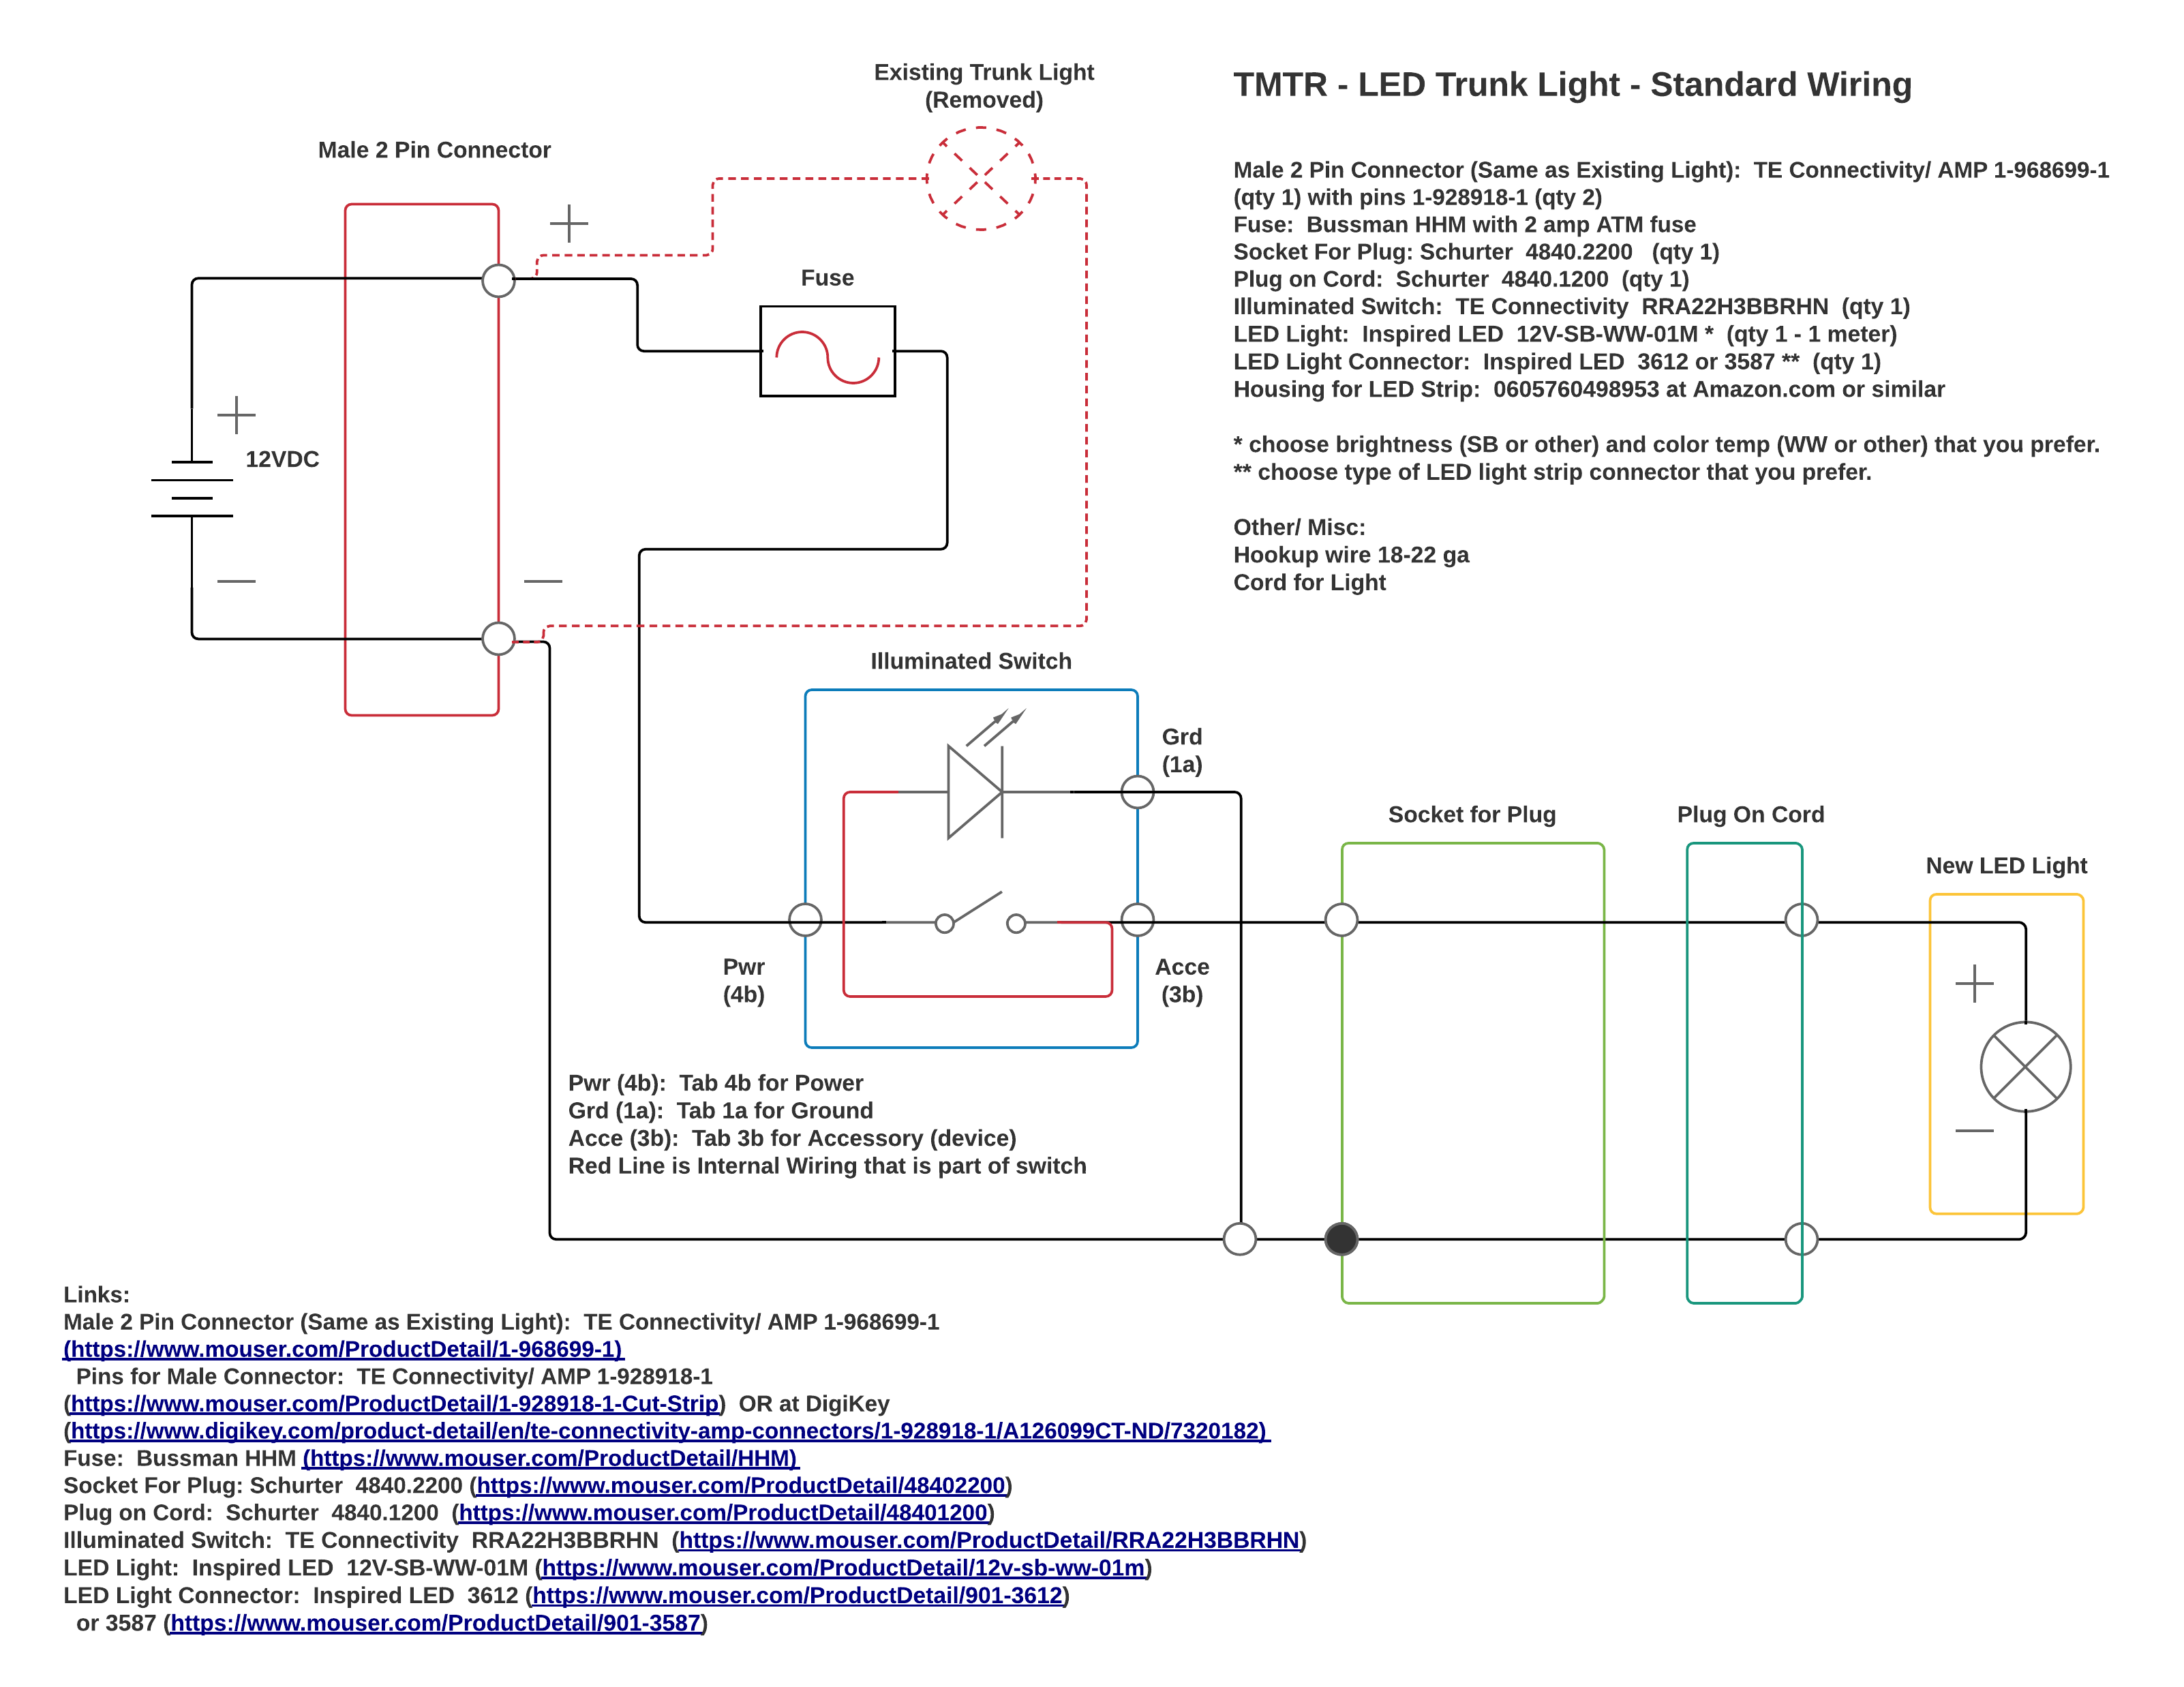 Electrical Schematic - Wiring Option 1